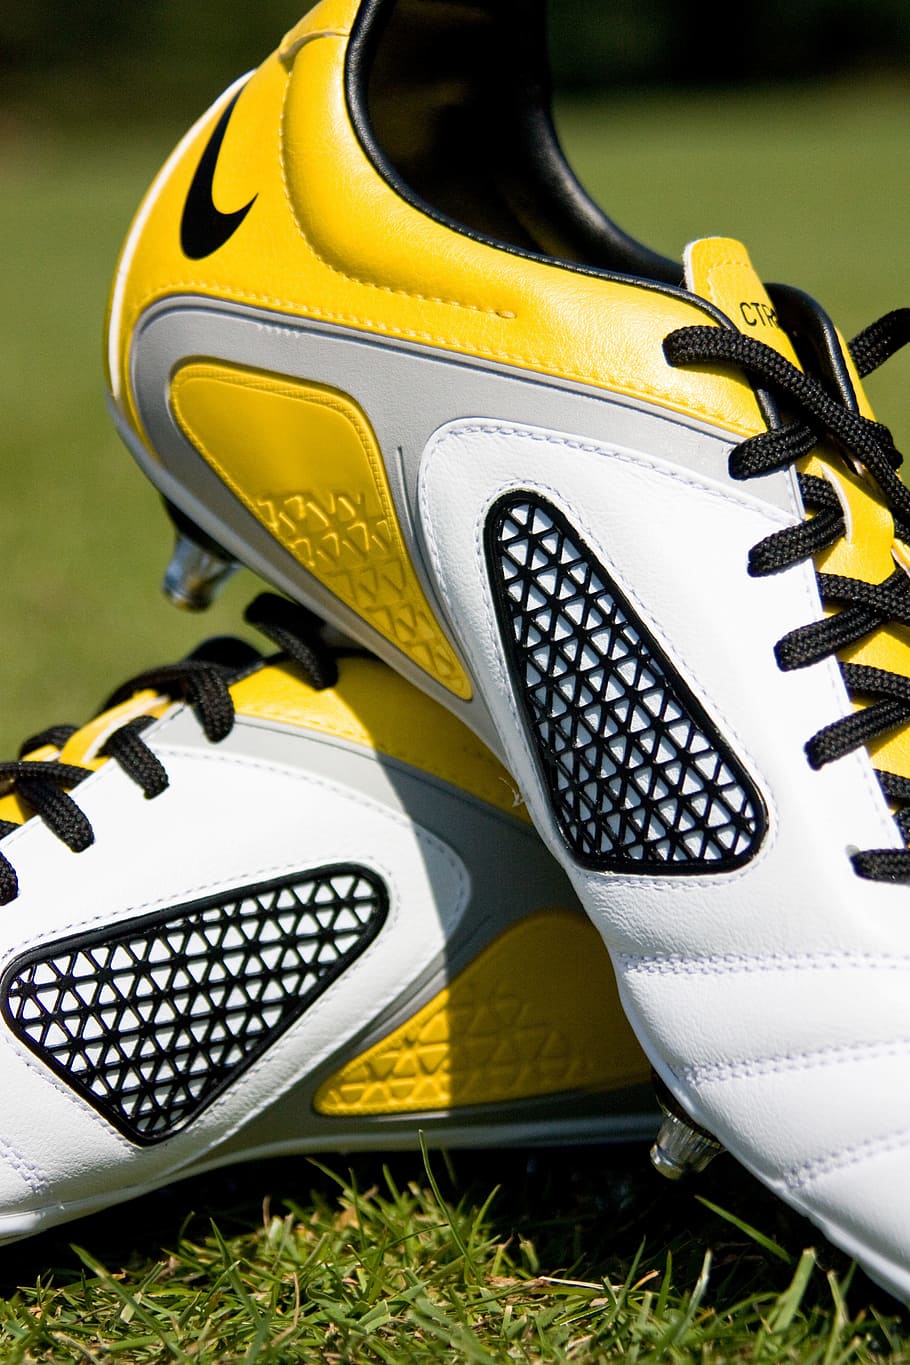 pair, white-and-yellow nike cleats, football, boots, shoes, sport, field, grass, park, team